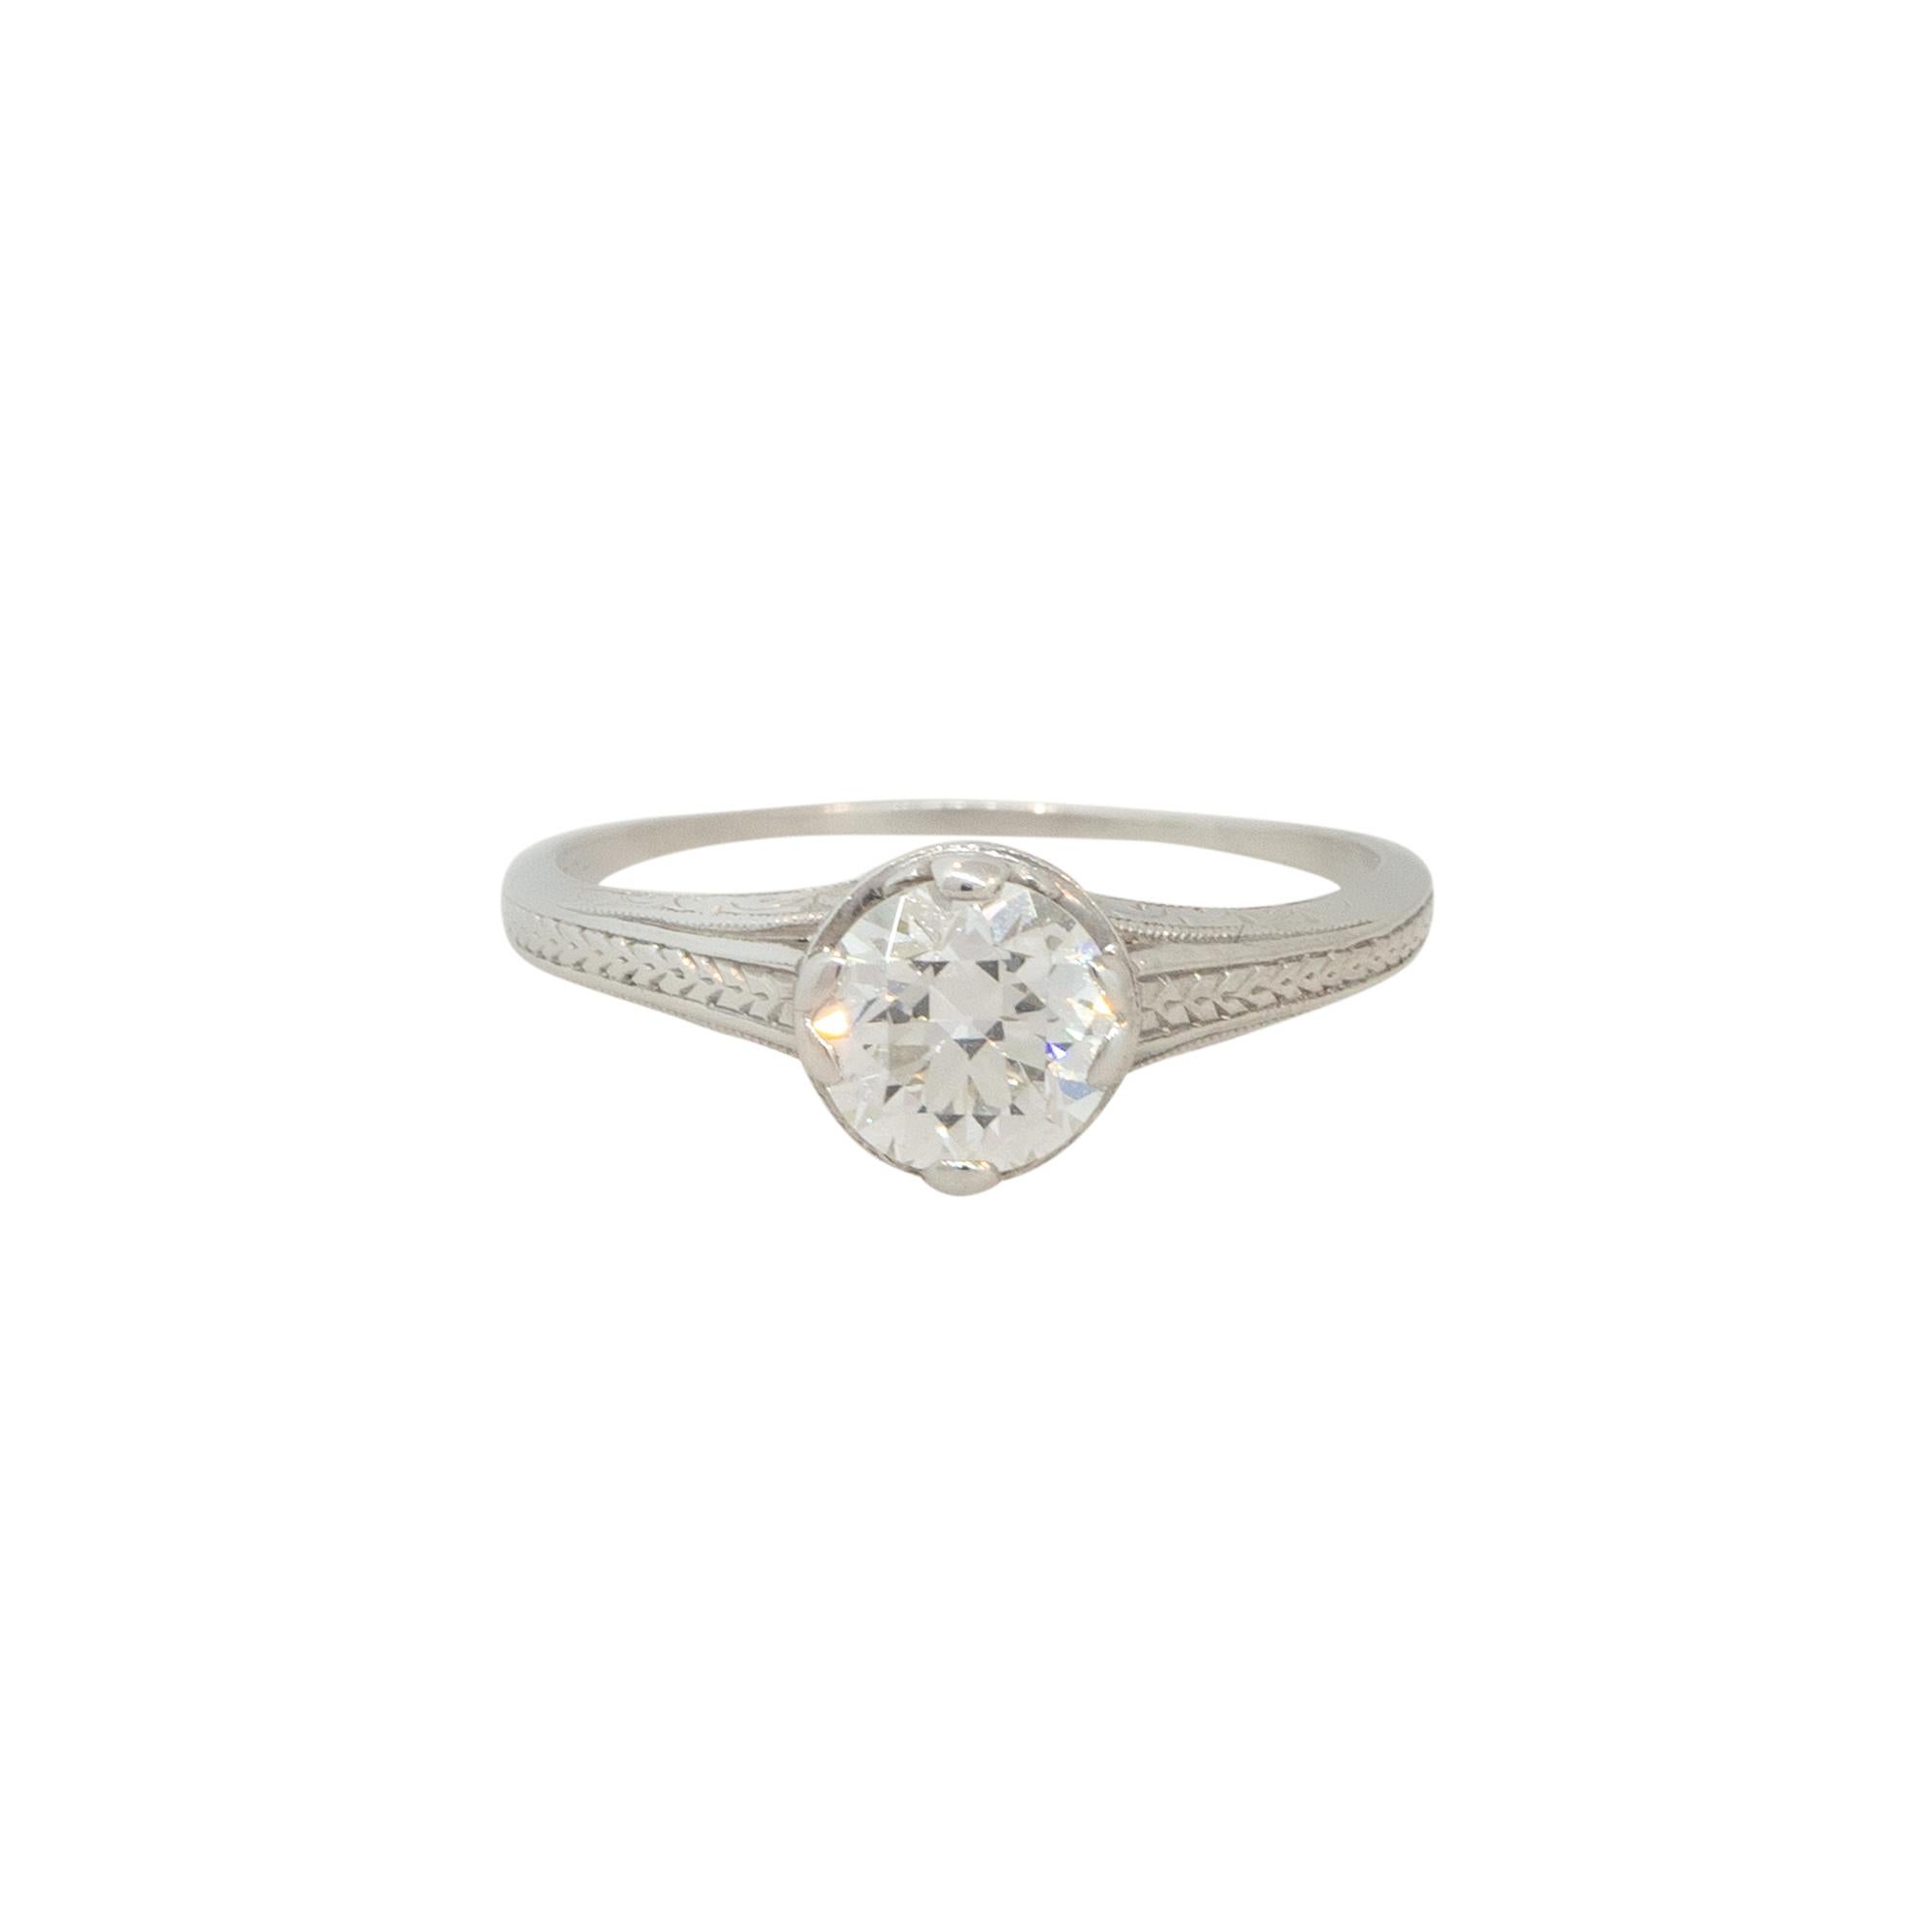 Platinum 1.0ctw Diamond Engagement Ring in Vintage Setting

Raymond Lee Jewelers in Boca Raton -- South Florida’s destination for diamonds, fine jewelry, antique jewelry, estate pieces, and vintage jewels.

Style: Women's Channel Set Diamond